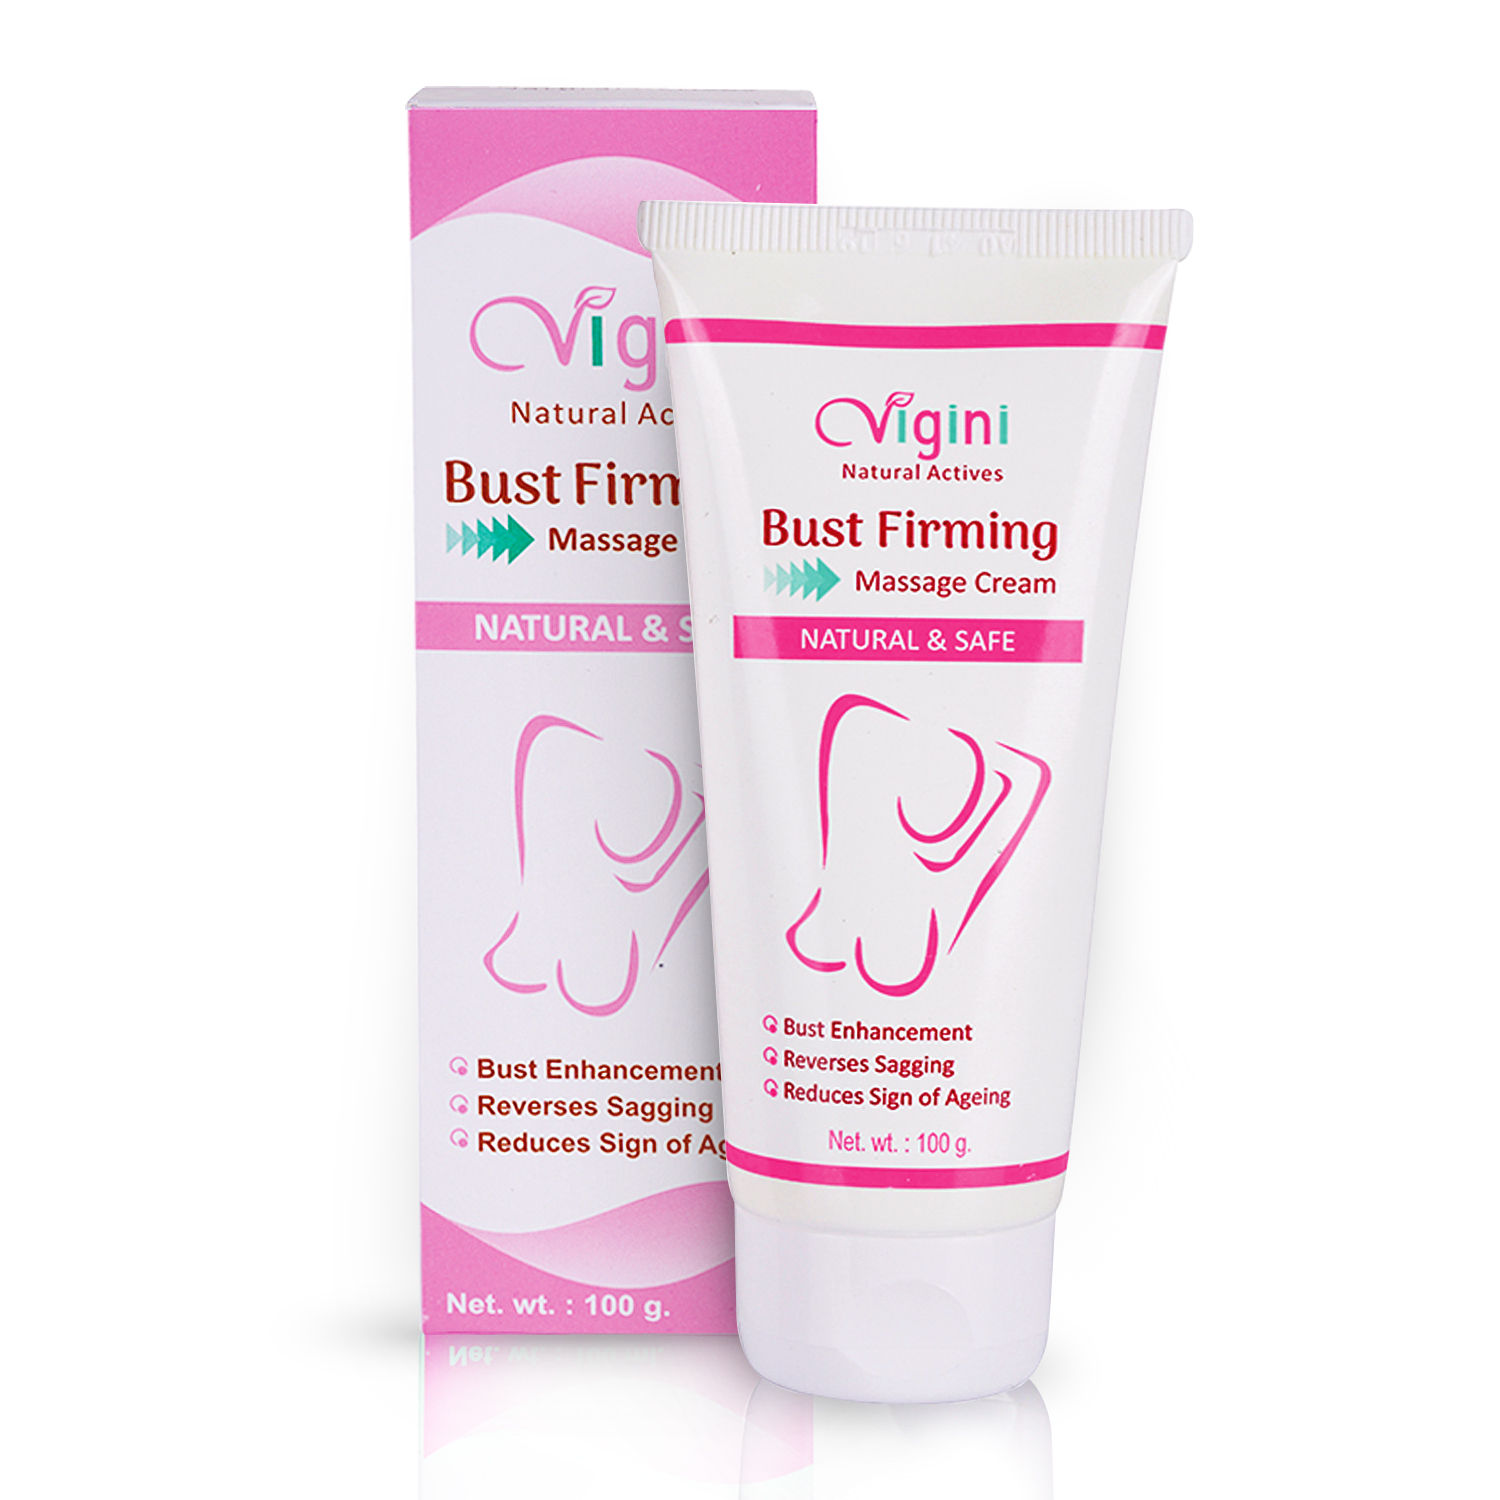 Vigini Bust Firming Breast Enlargement Tightening & Lifting Growth Increase Size Cream